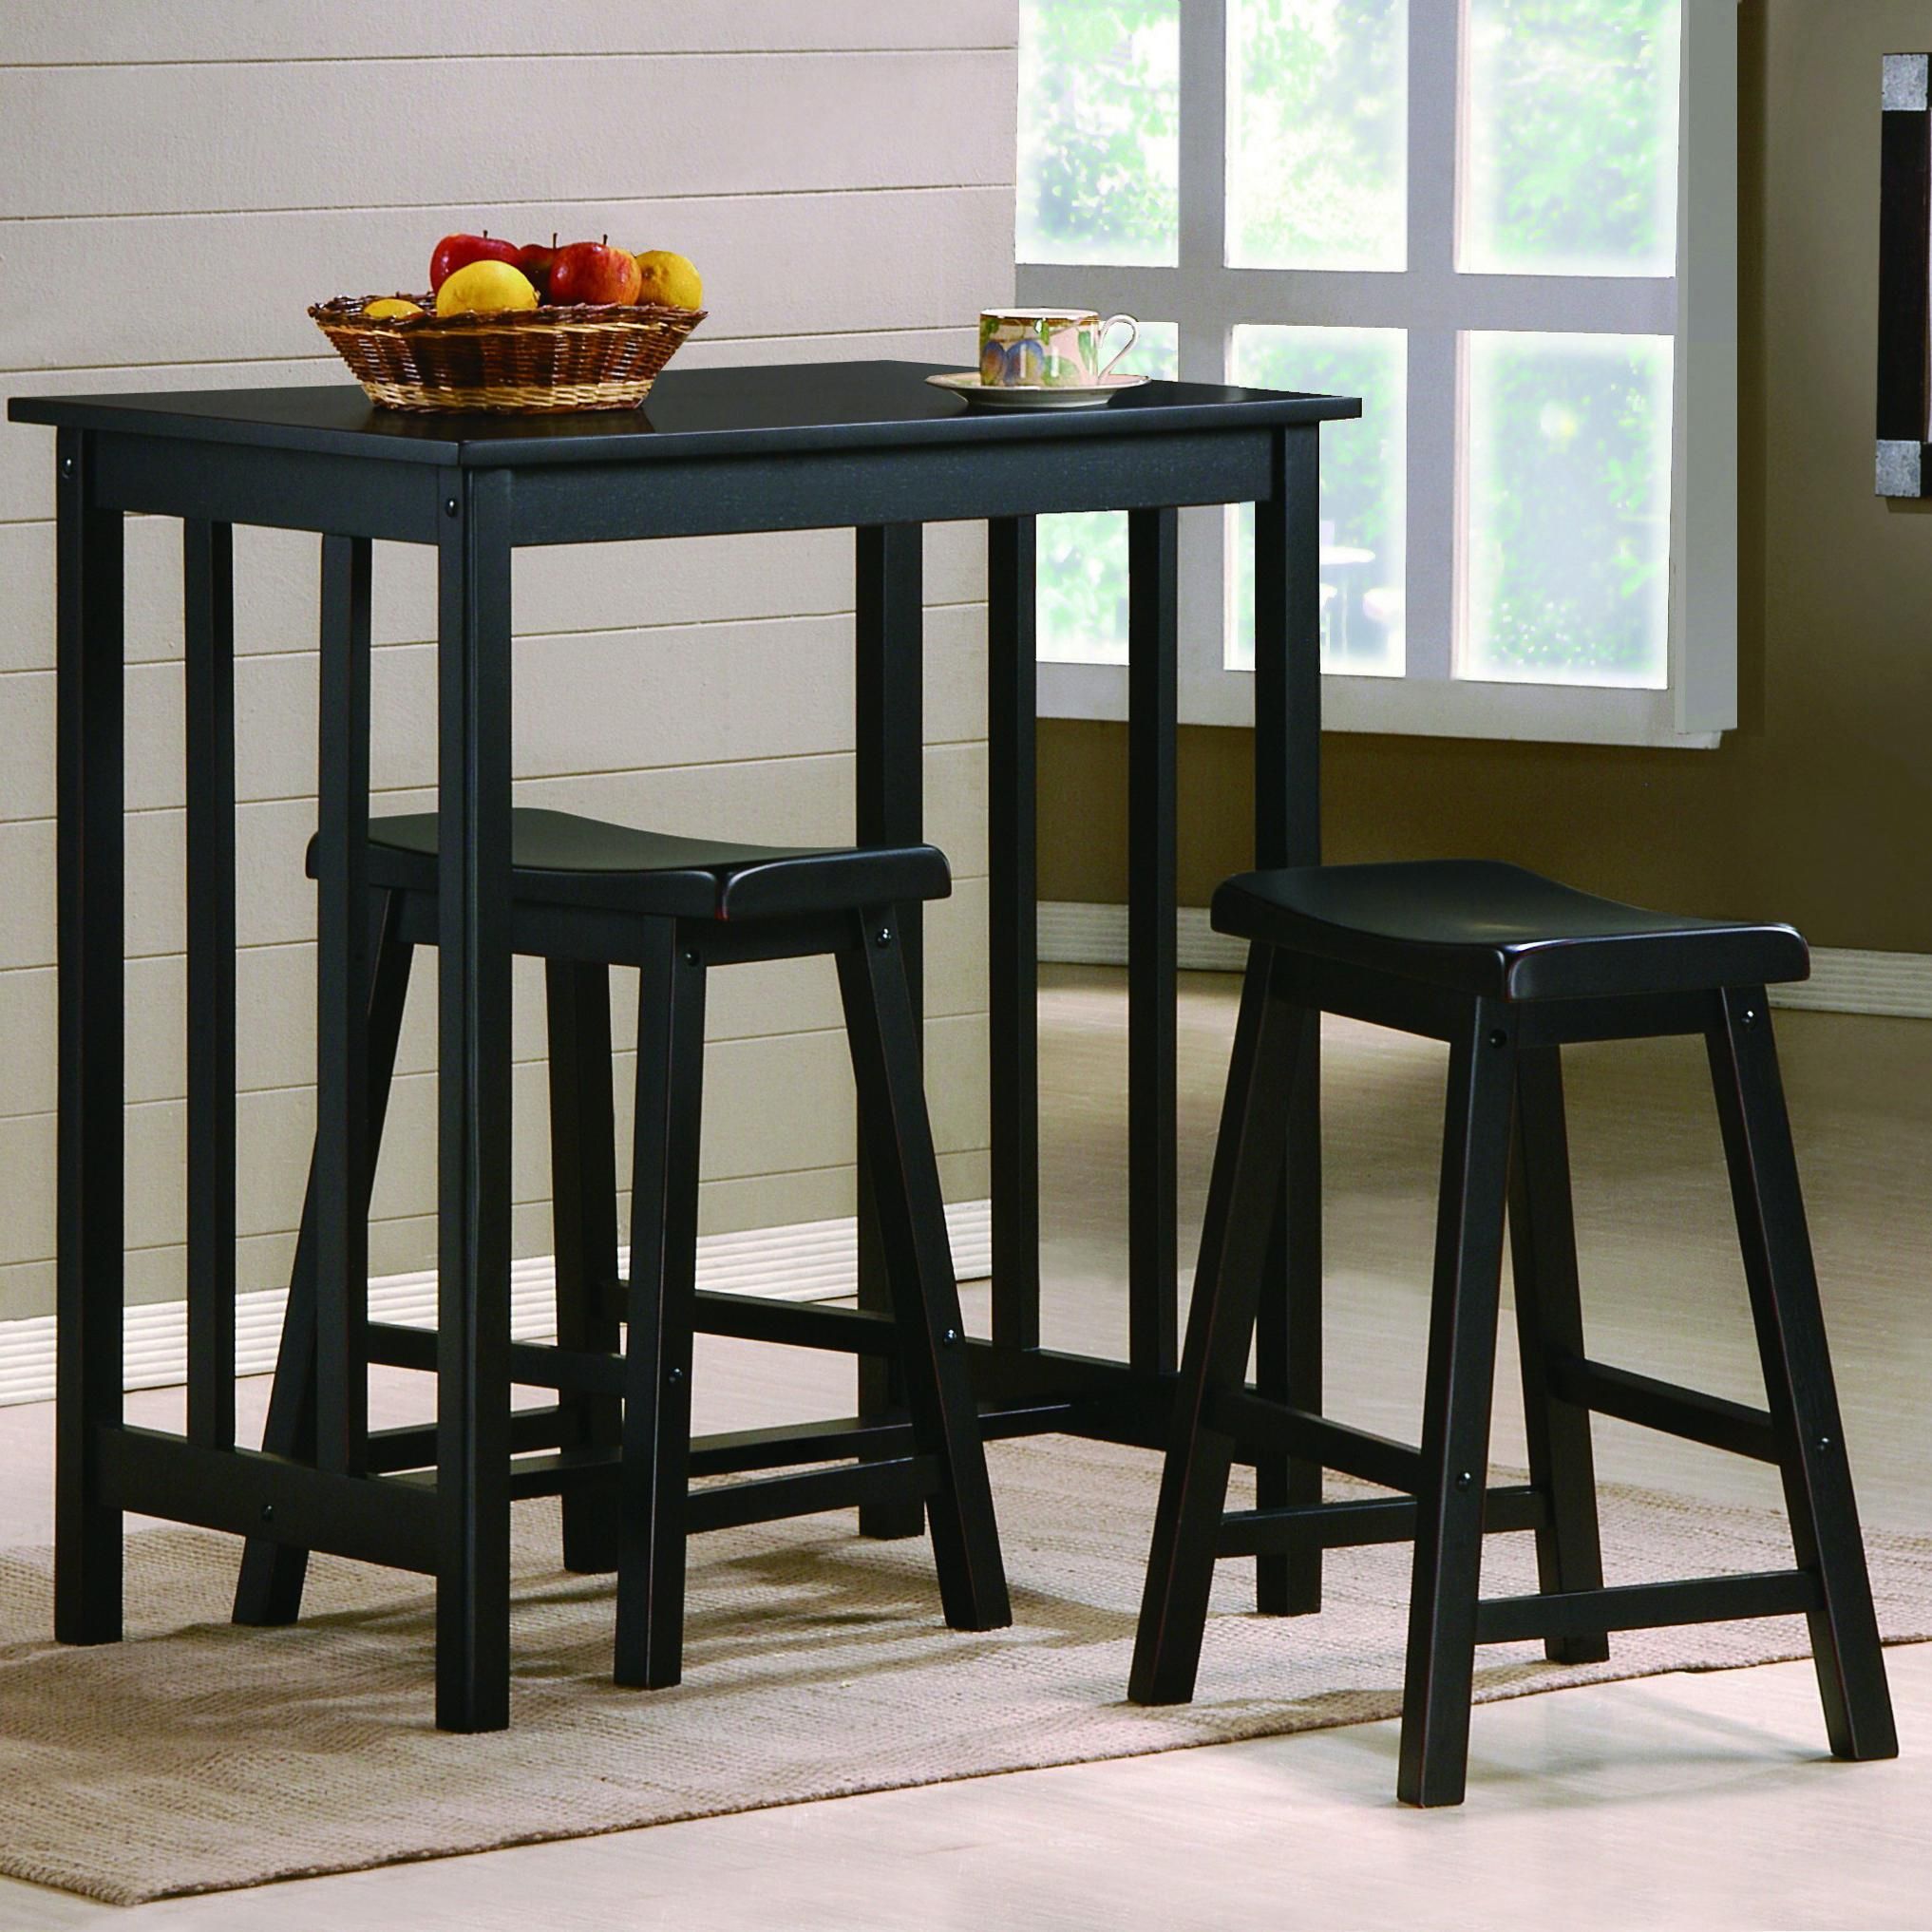 Crown Mark Dina 2779set 3 Piece Counter Height Table & Stool Set Inside Best And Newest 3 Piece Breakfast Dining Sets (View 16 of 20)